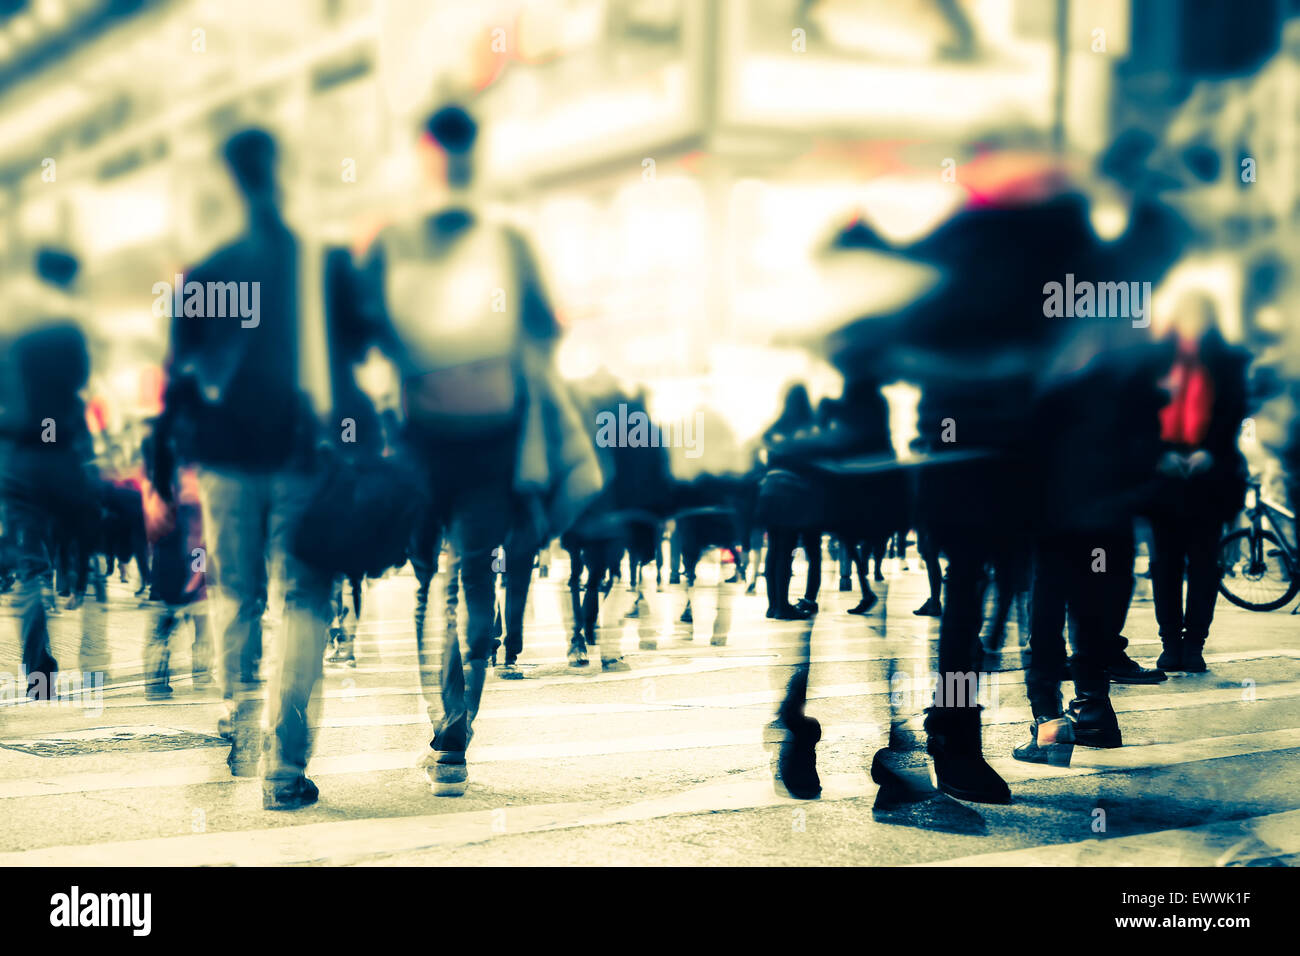 Blurred image of people moving in crowded night city street. Art toning abstract urban background. Hong Kong Stock Photo